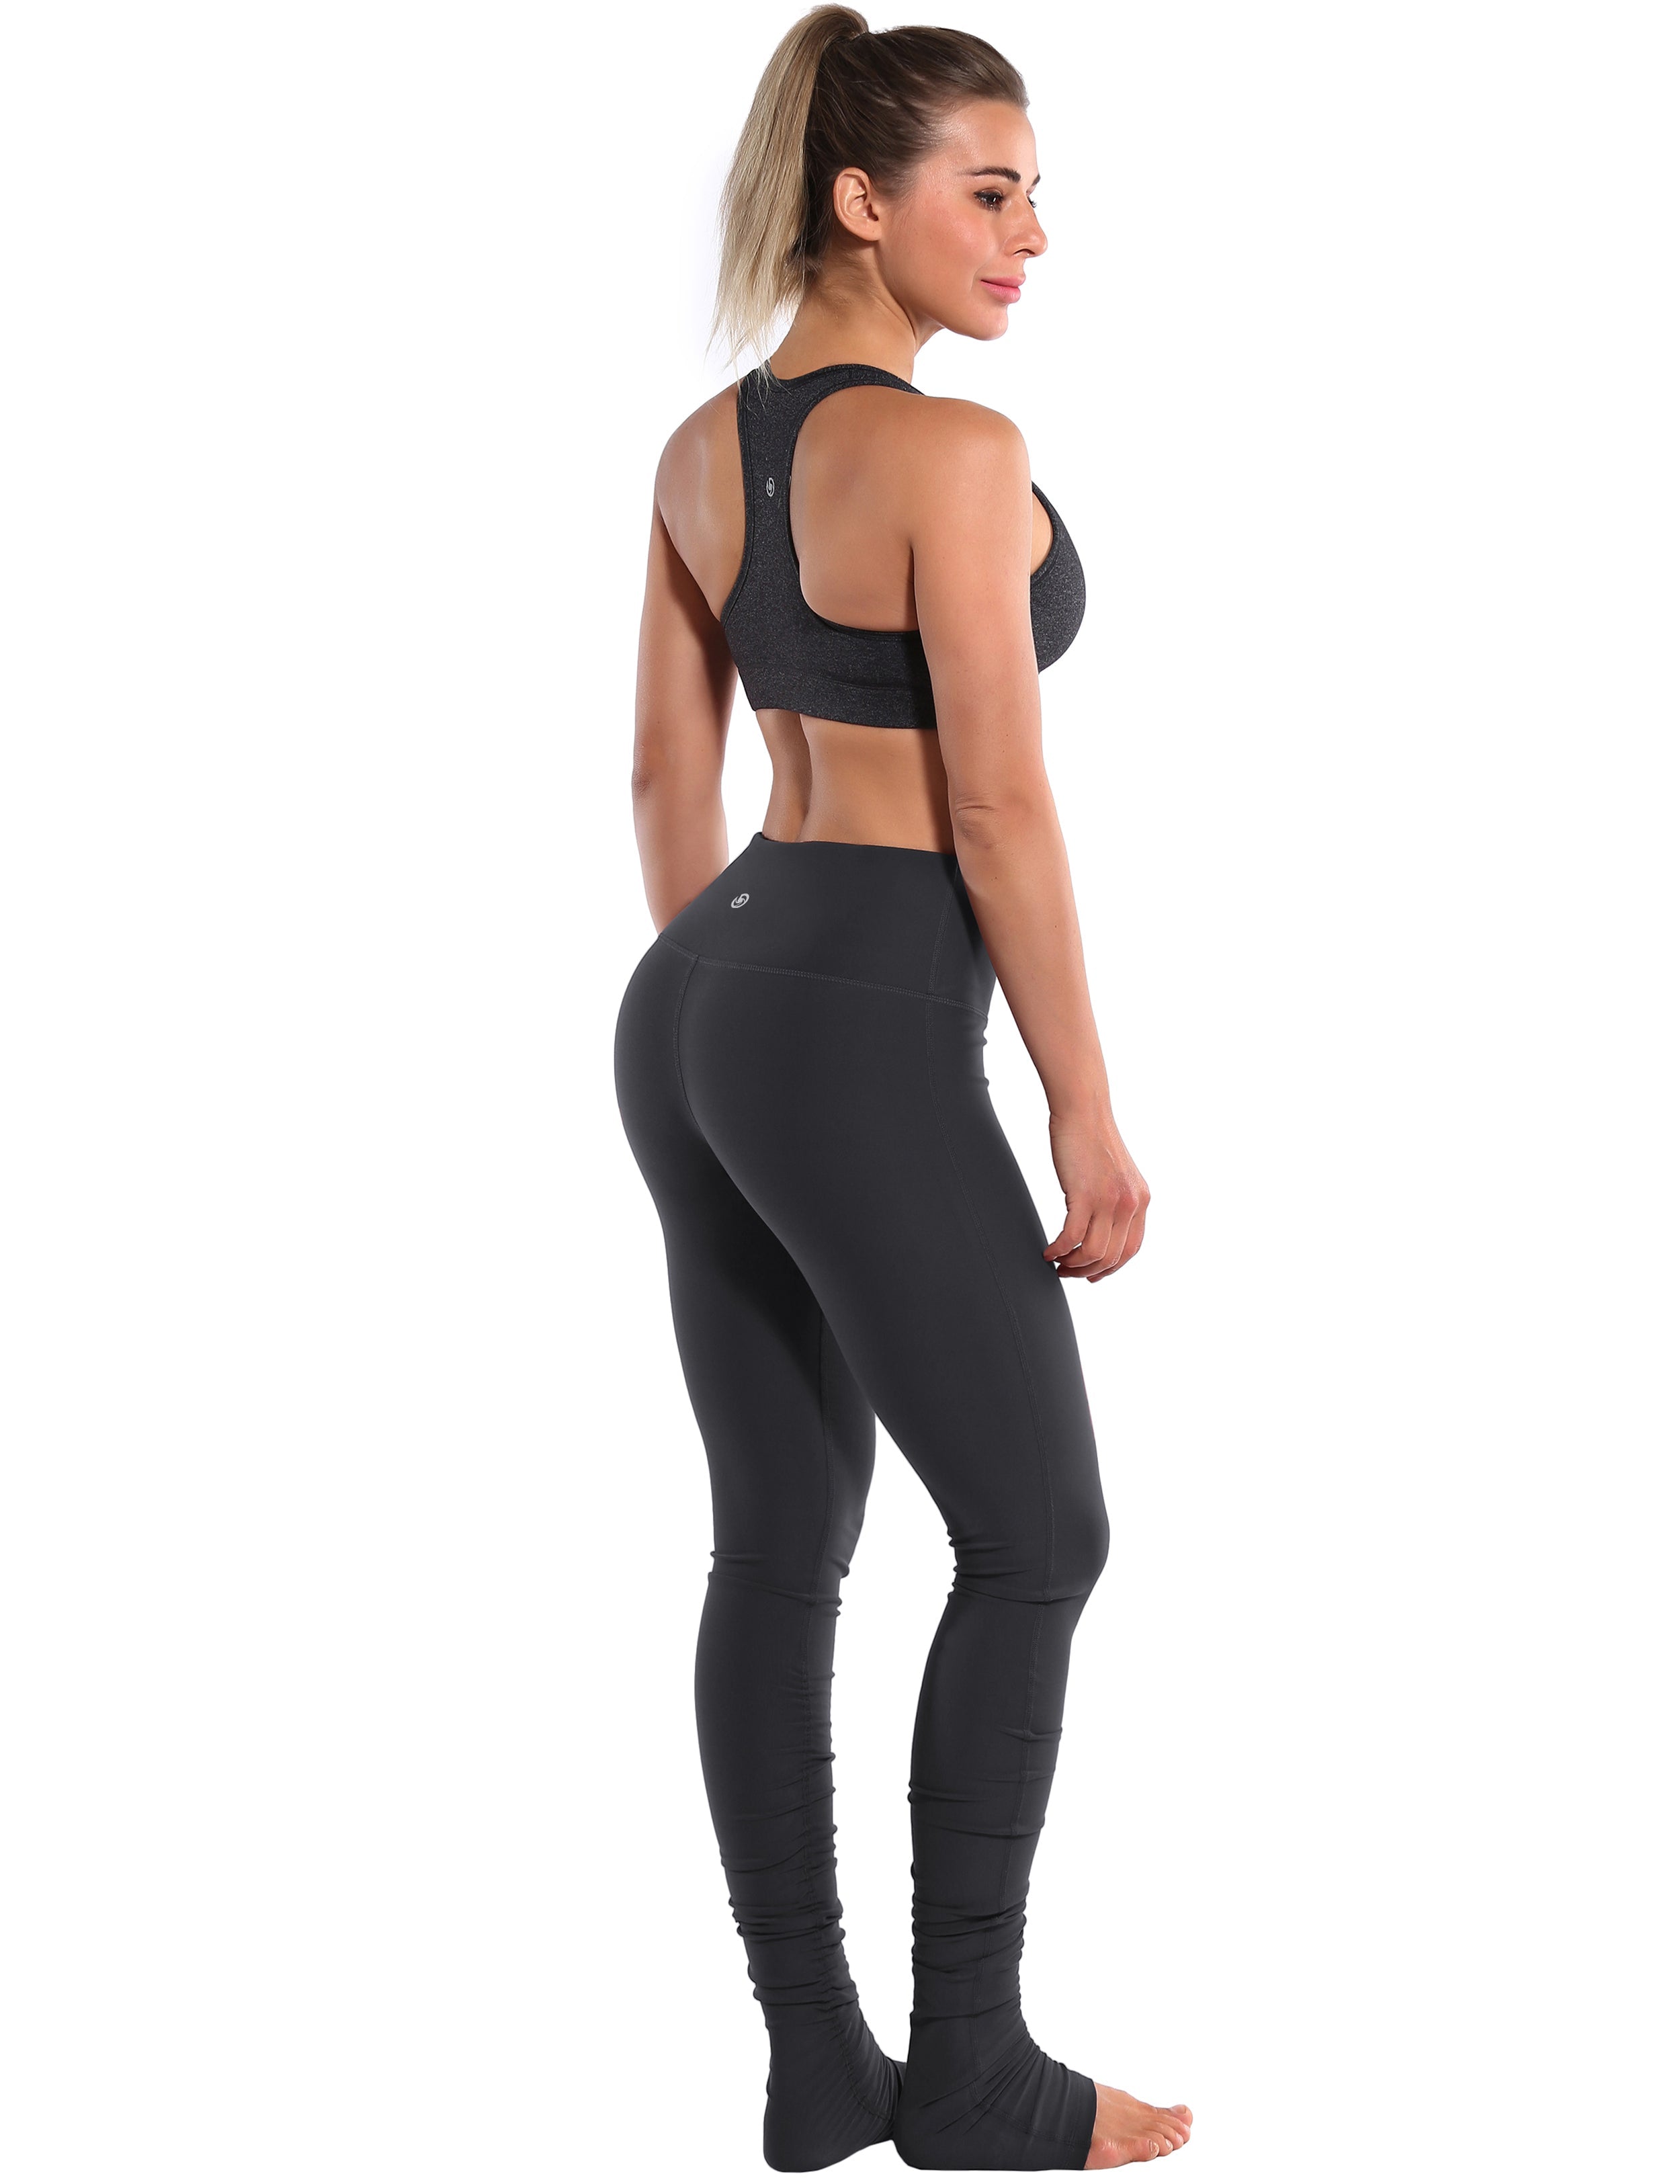 Over the Heel Yoga Pants shadowcharcoal Over the Heel Design 87%Nylon/13%Spandex Fabric doesn't attract lint easily 4-way stretch No see-through Moisture-wicking Tummy control